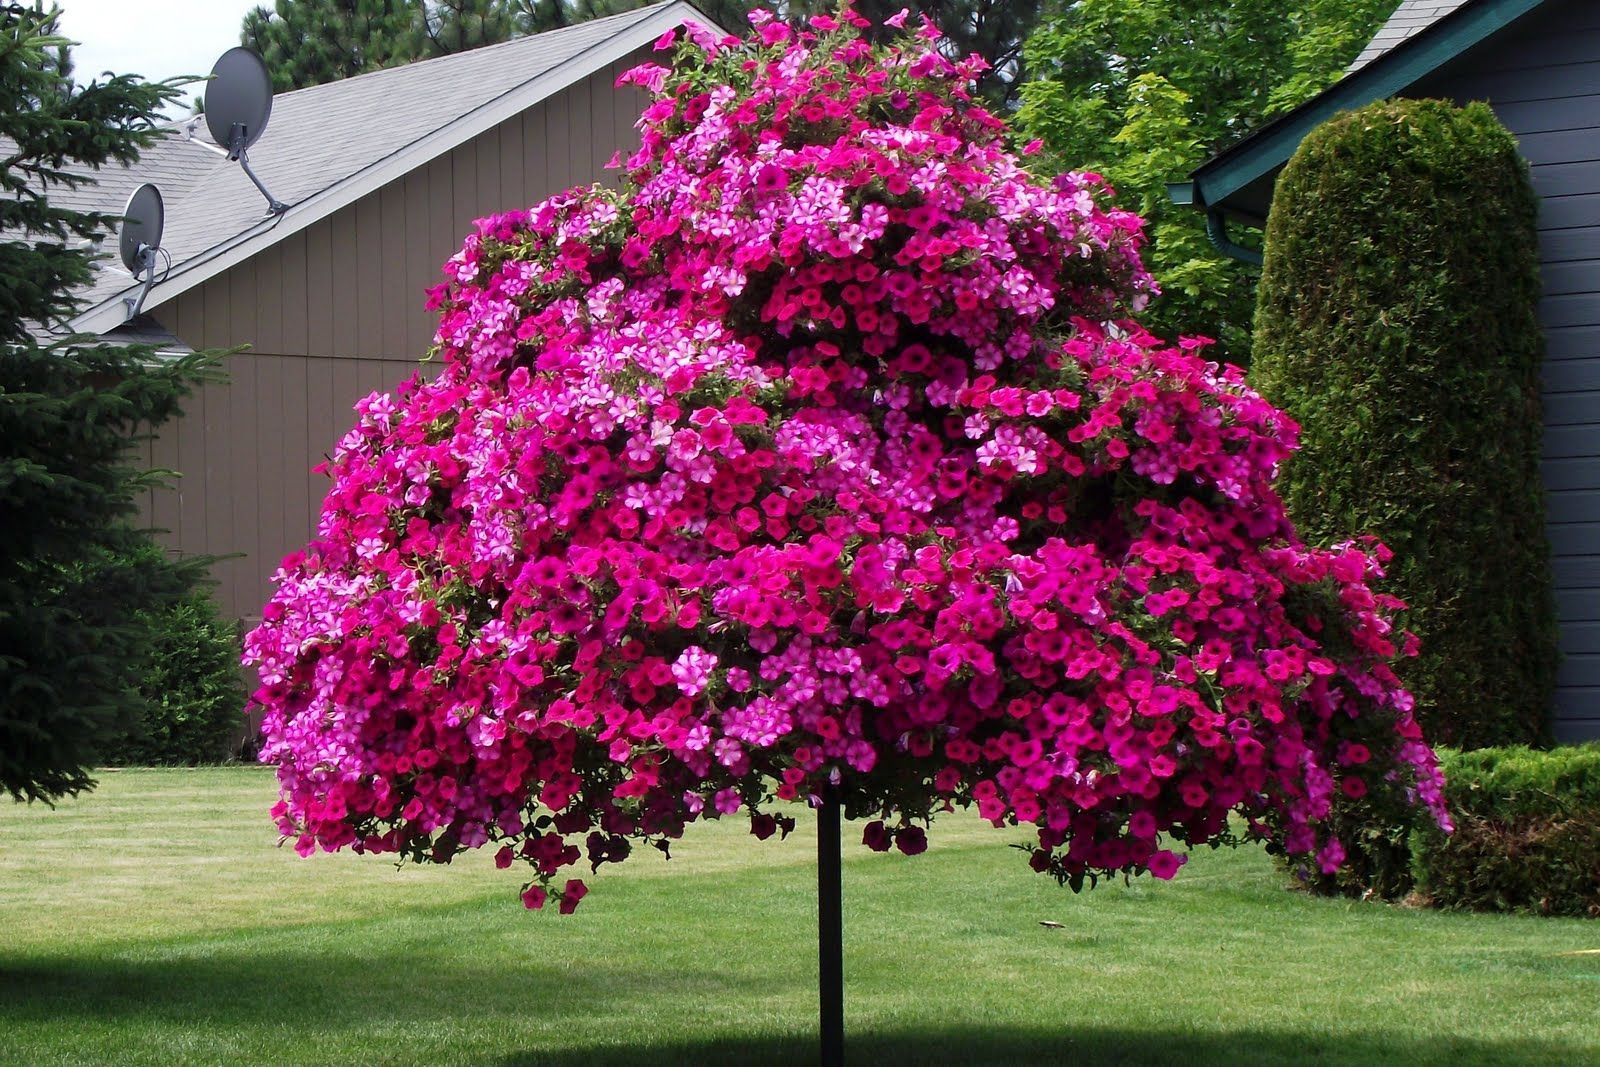 This petunia tree was made with steel poles and pots to create the illusion of a standard form petunia